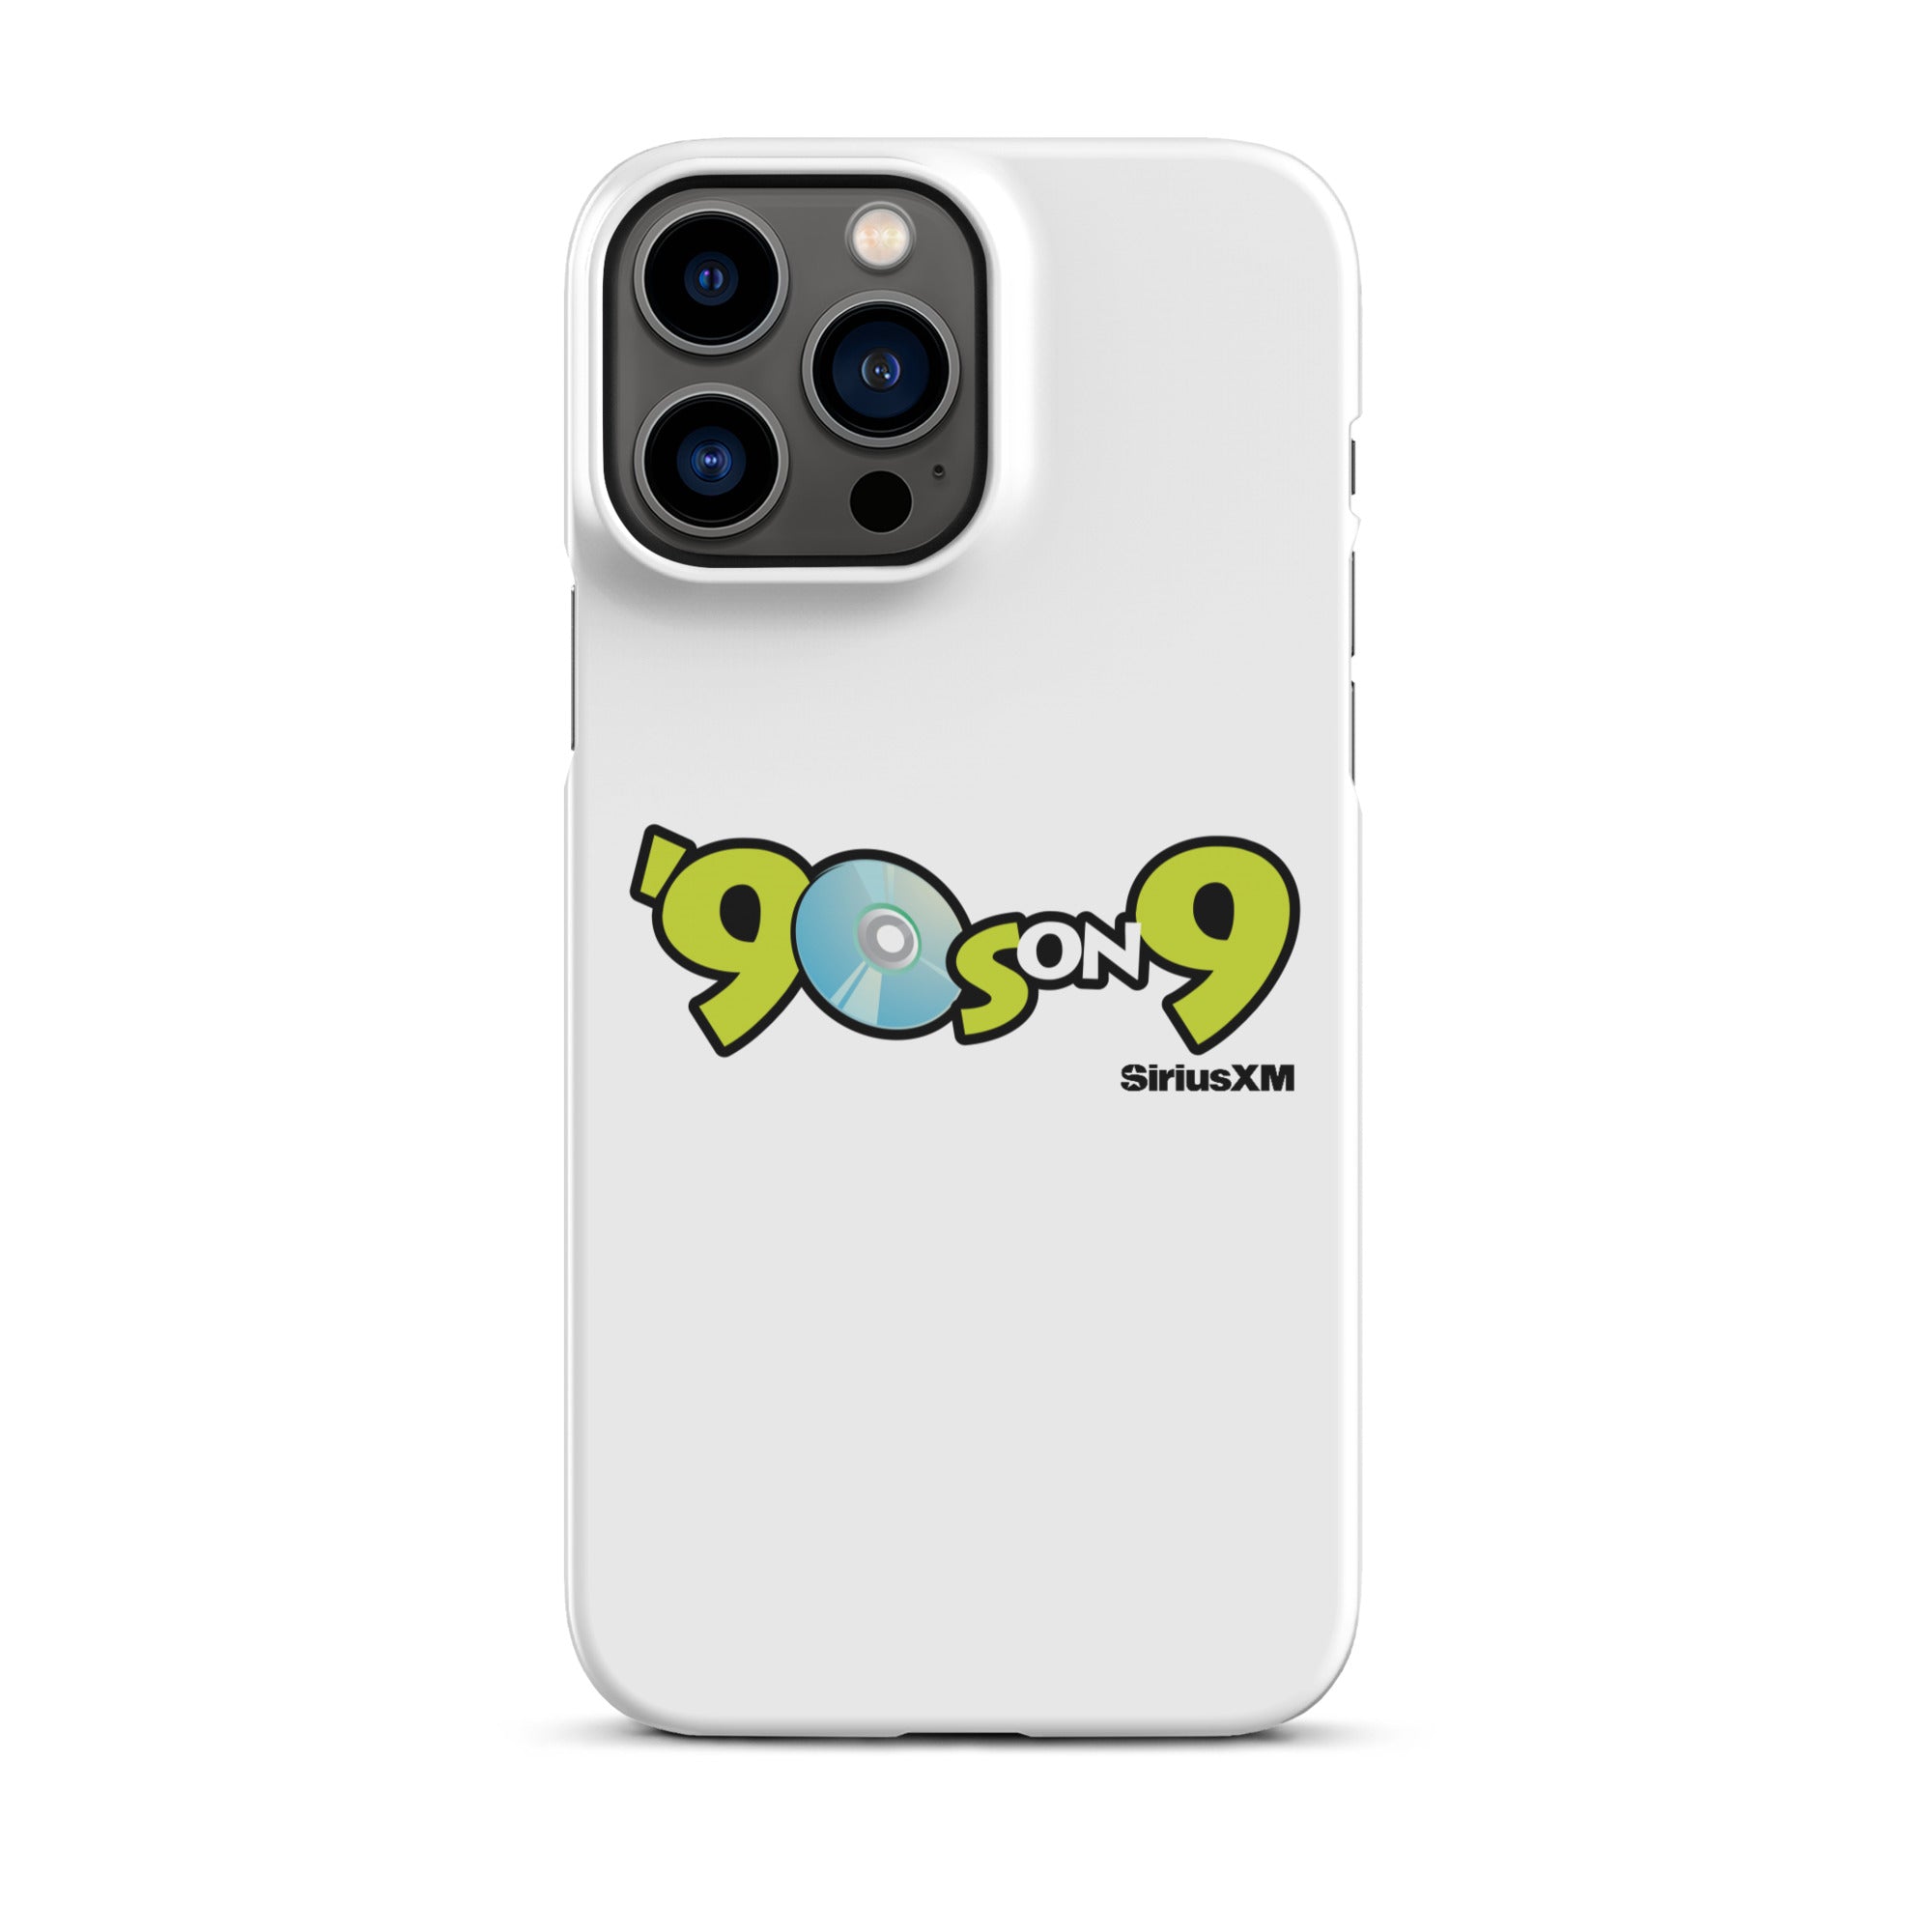 90s on 9: iPhone® Snap Case